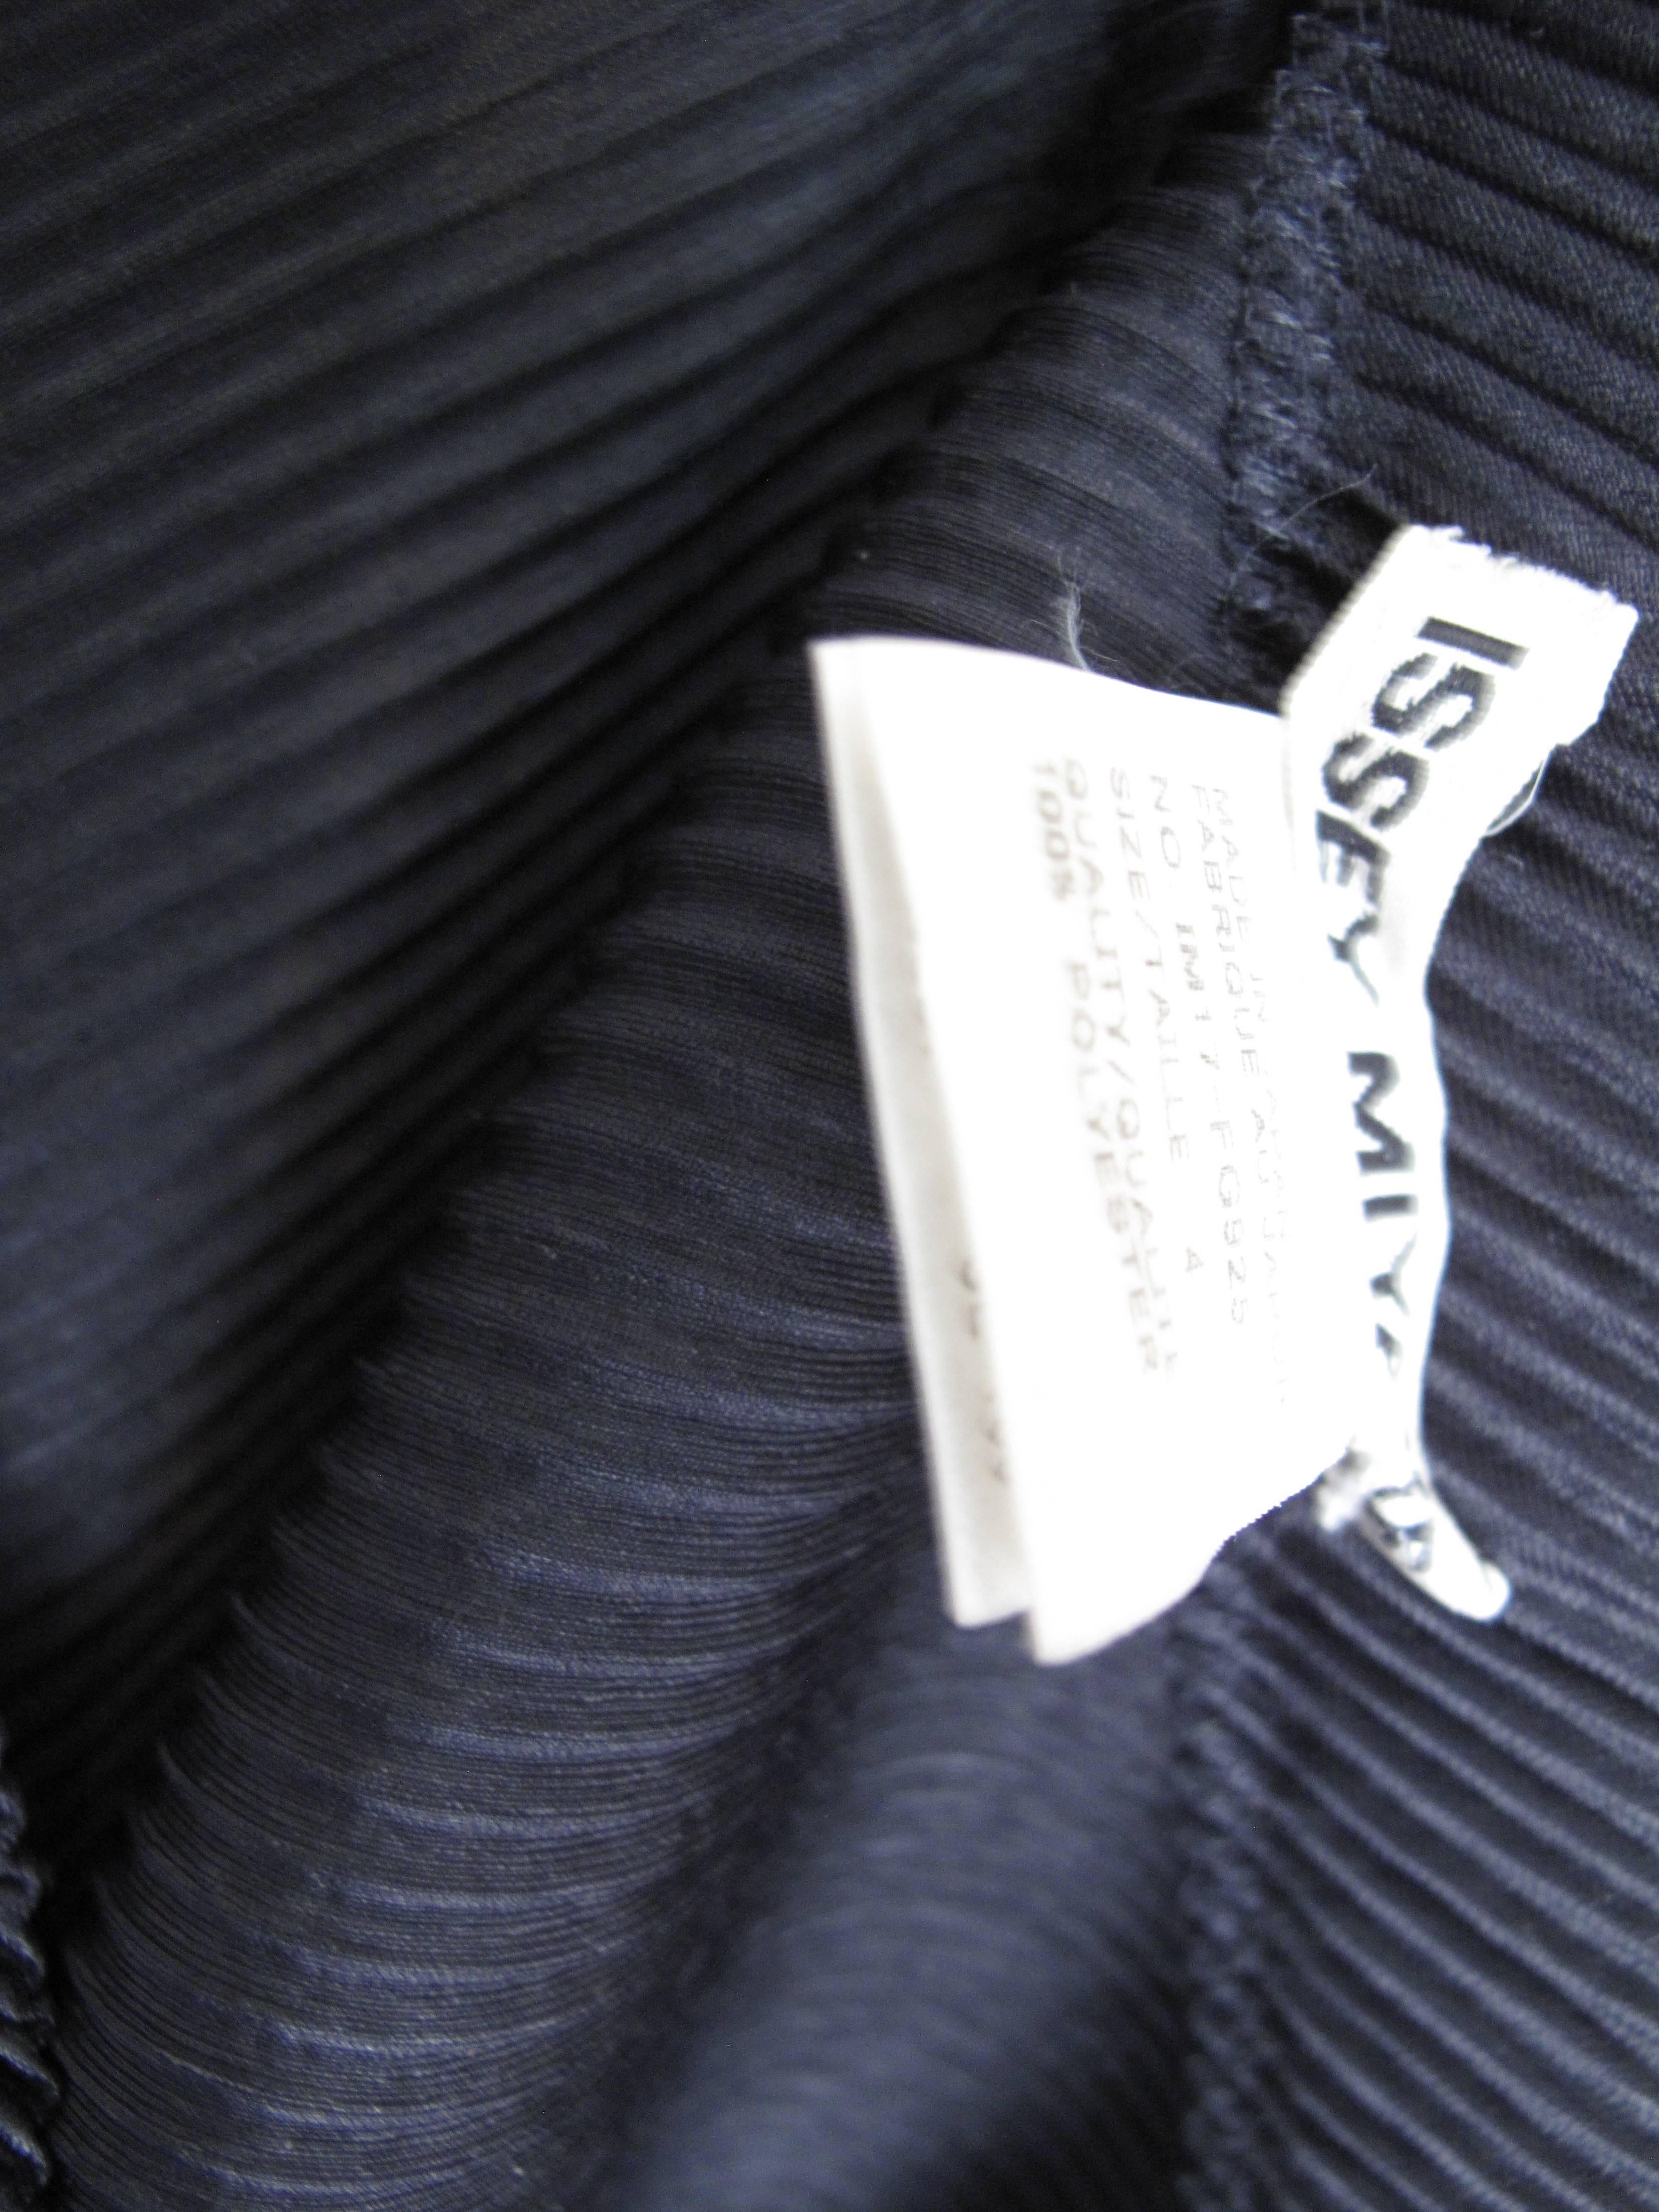 Issey Miyake black pleated asymmetrical skirt.  Condition: Excellent. Polyester fabric. Japan Size 4 

We accept returns for refund, please see our terms.  We offer free ground shipping within the US. Please let us know if you have any questions.
